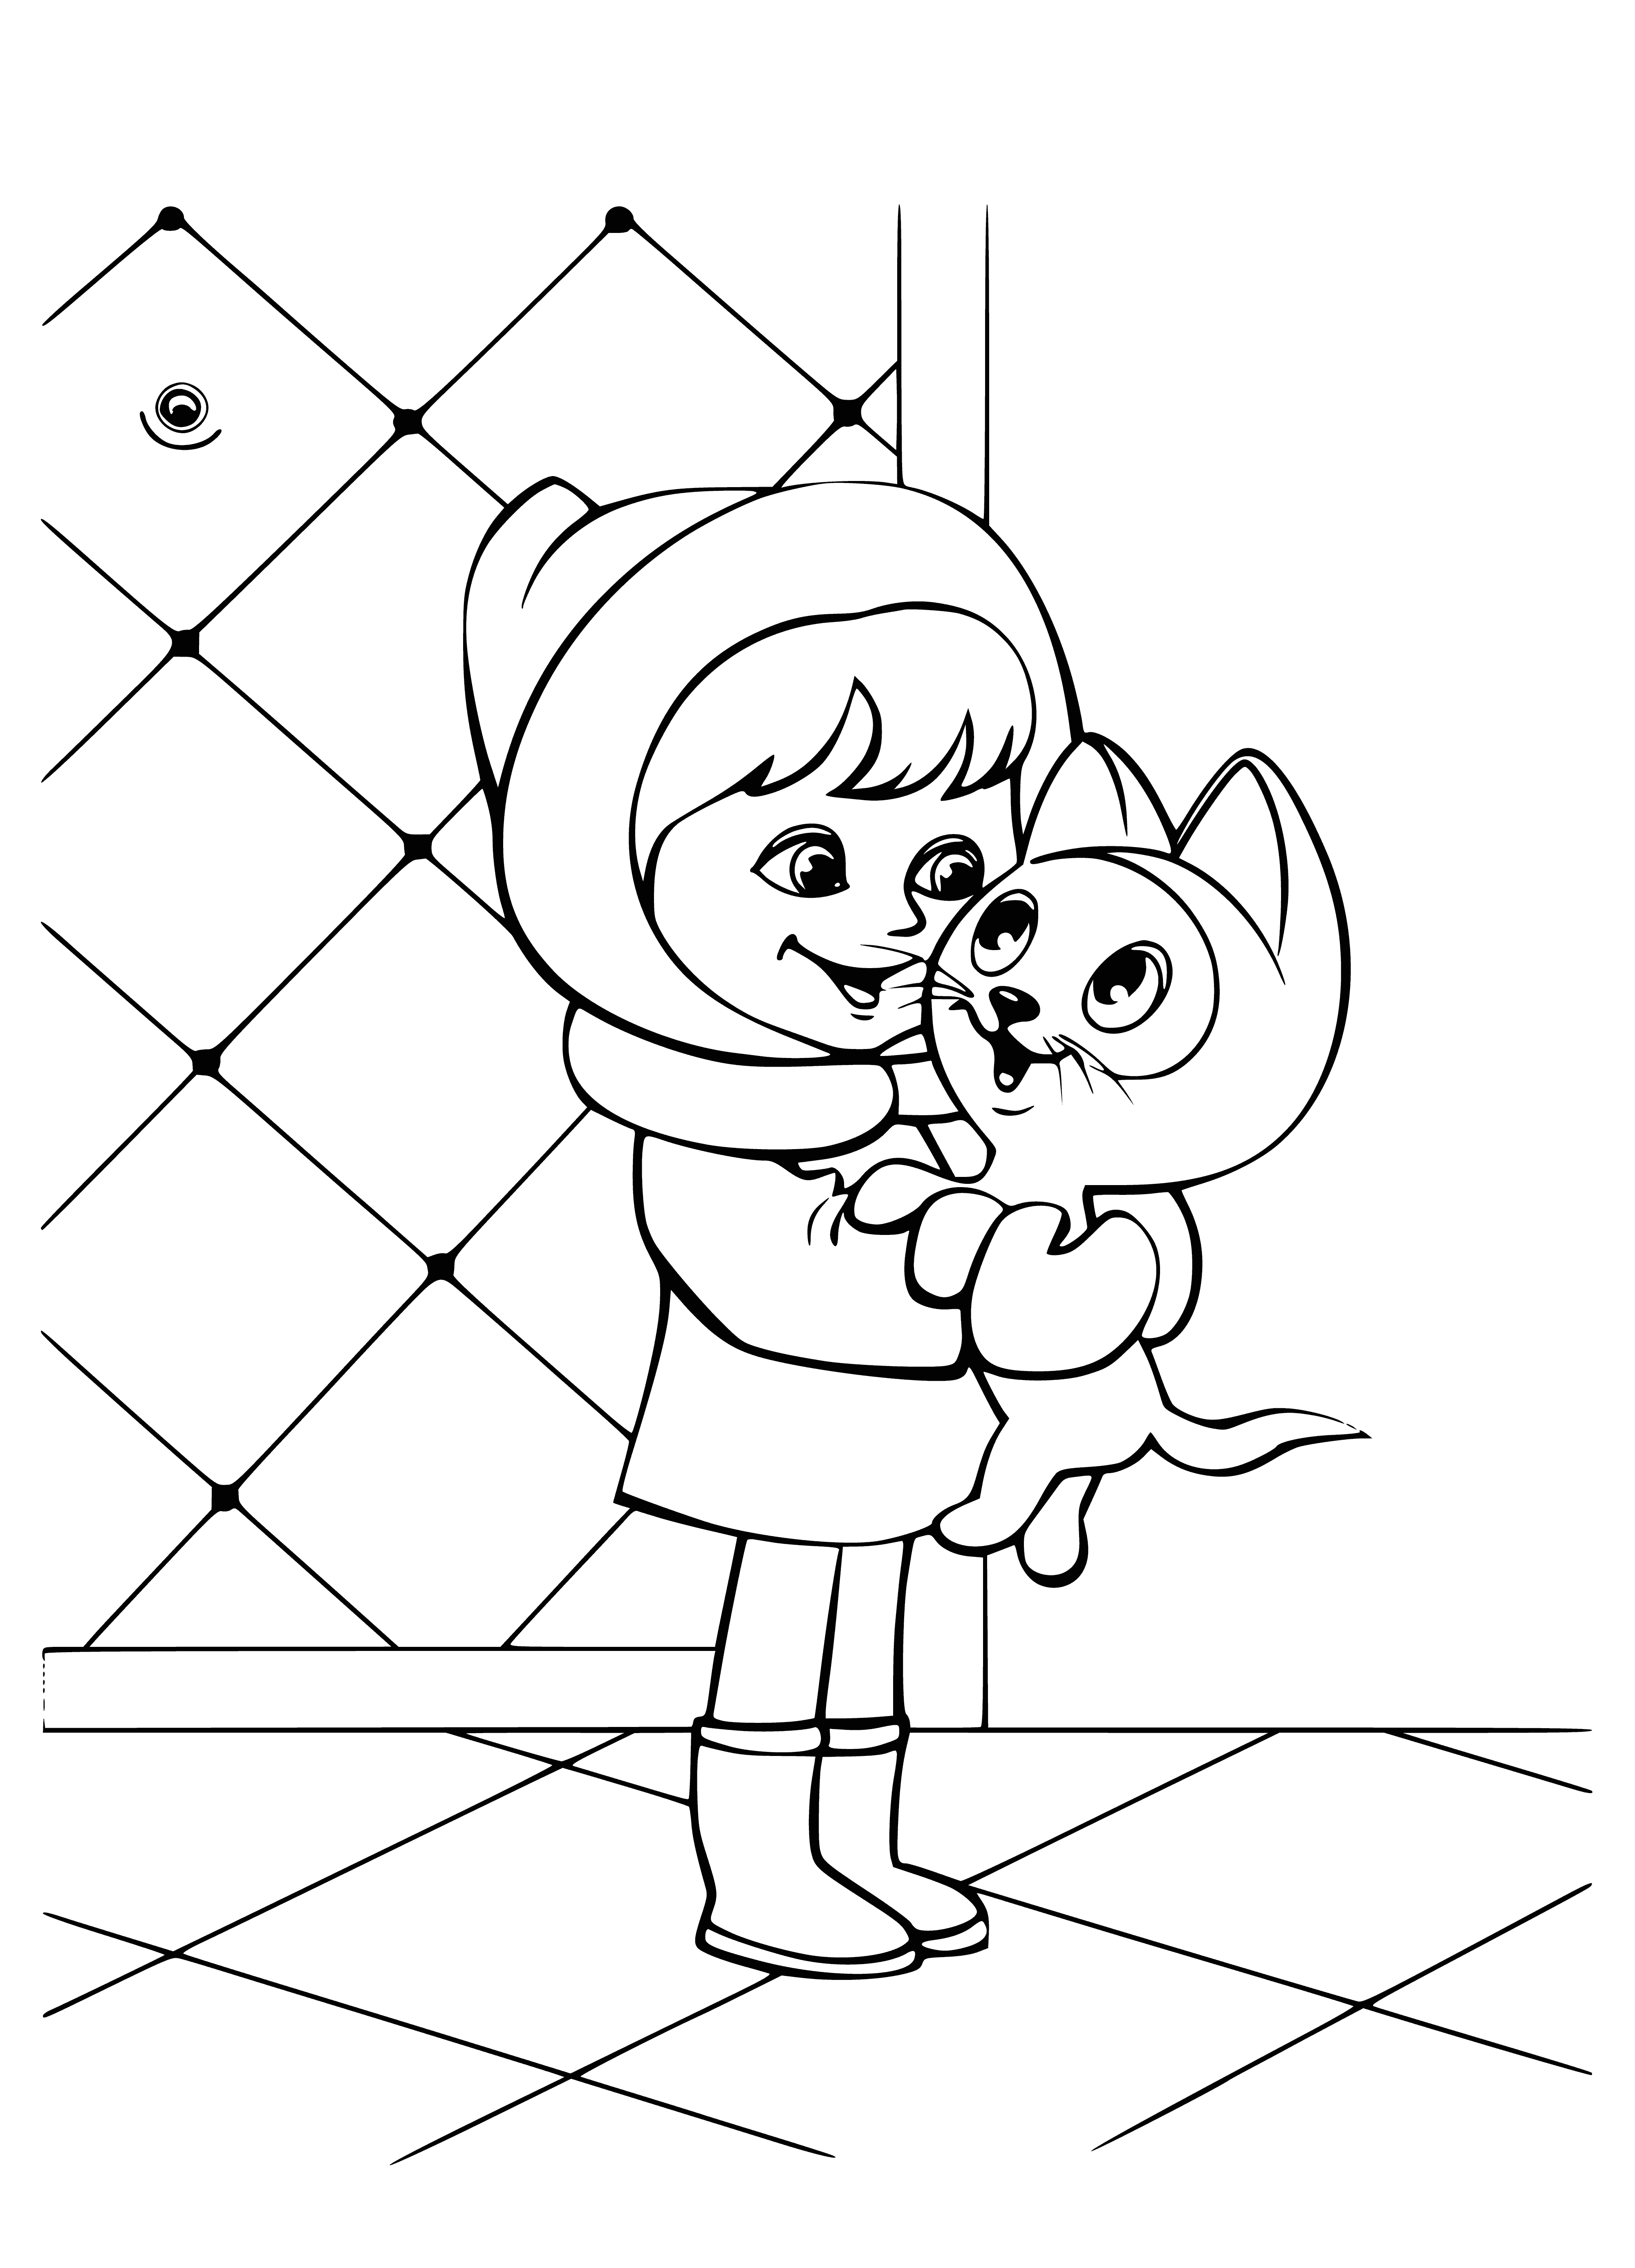 coloring page: Girl holds a kitten, light brown with a black nose, looking up with green eyes. Girl smiles, eyes closed.